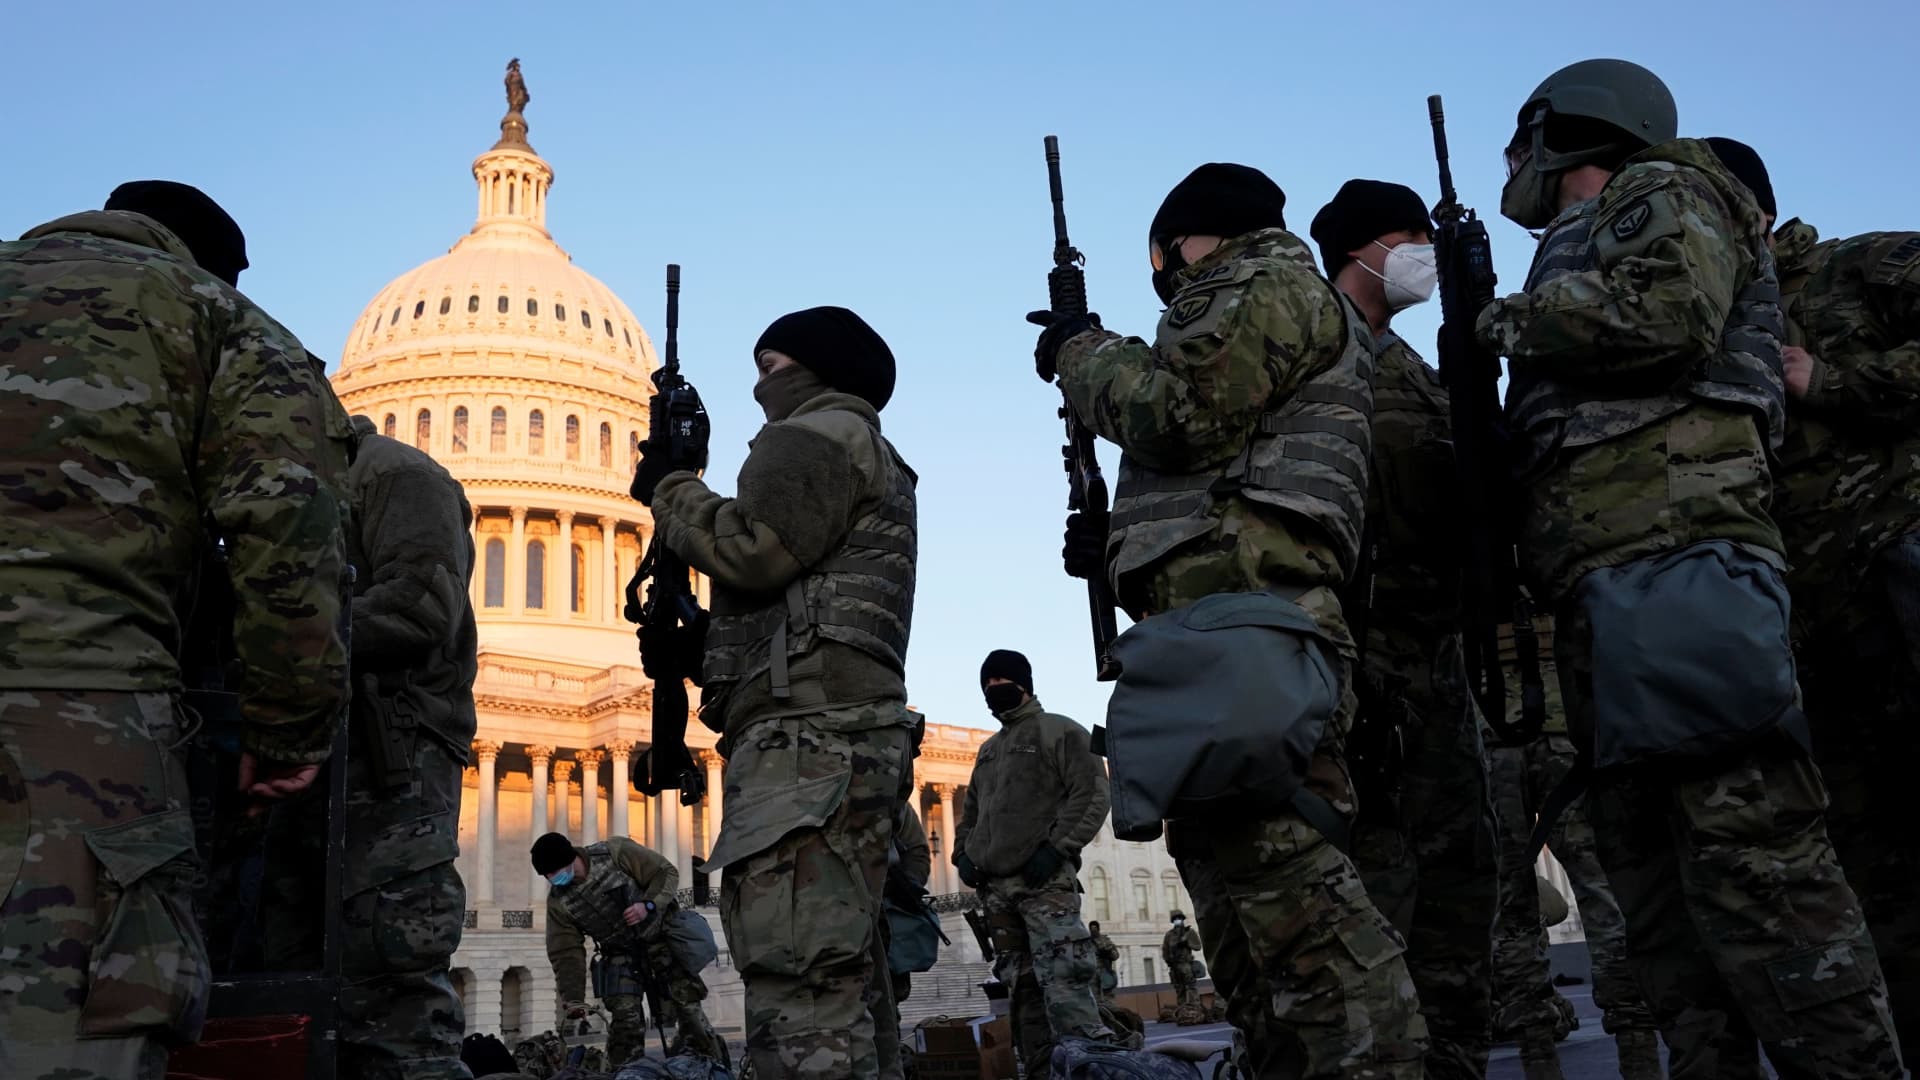 Members of the National Guard are given weapons before Democrats begin debating one article of impeachment against U.S. President Donald Trump at the U.S. Capitol, in Washington, U.S., January 13, 2021.